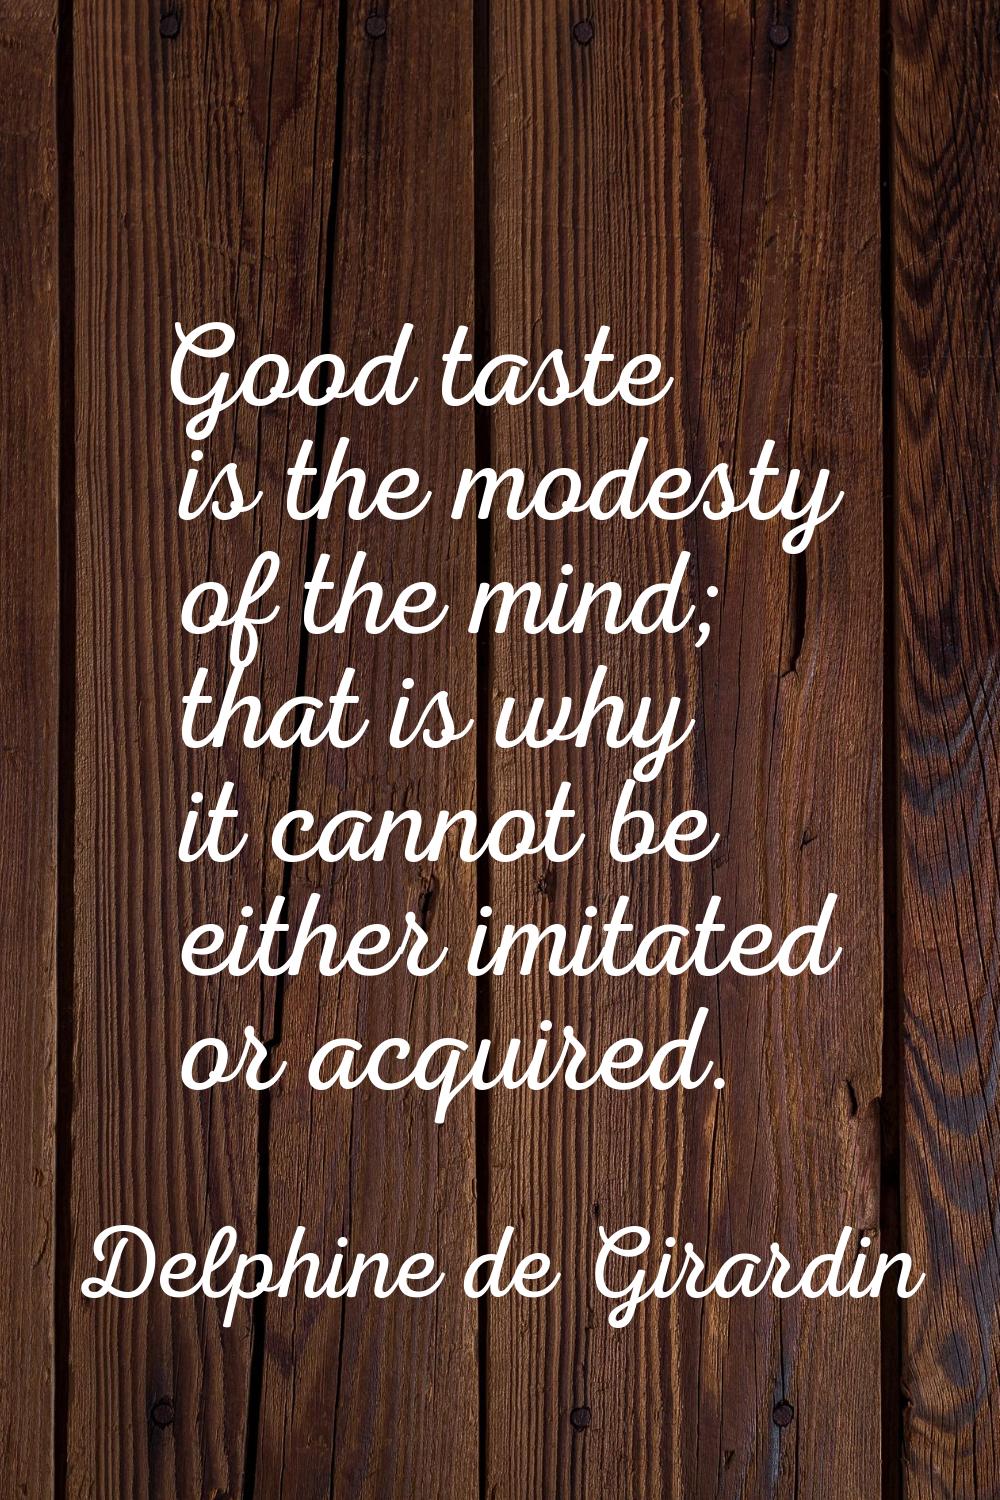 Good taste is the modesty of the mind; that is why it cannot be either imitated or acquired.